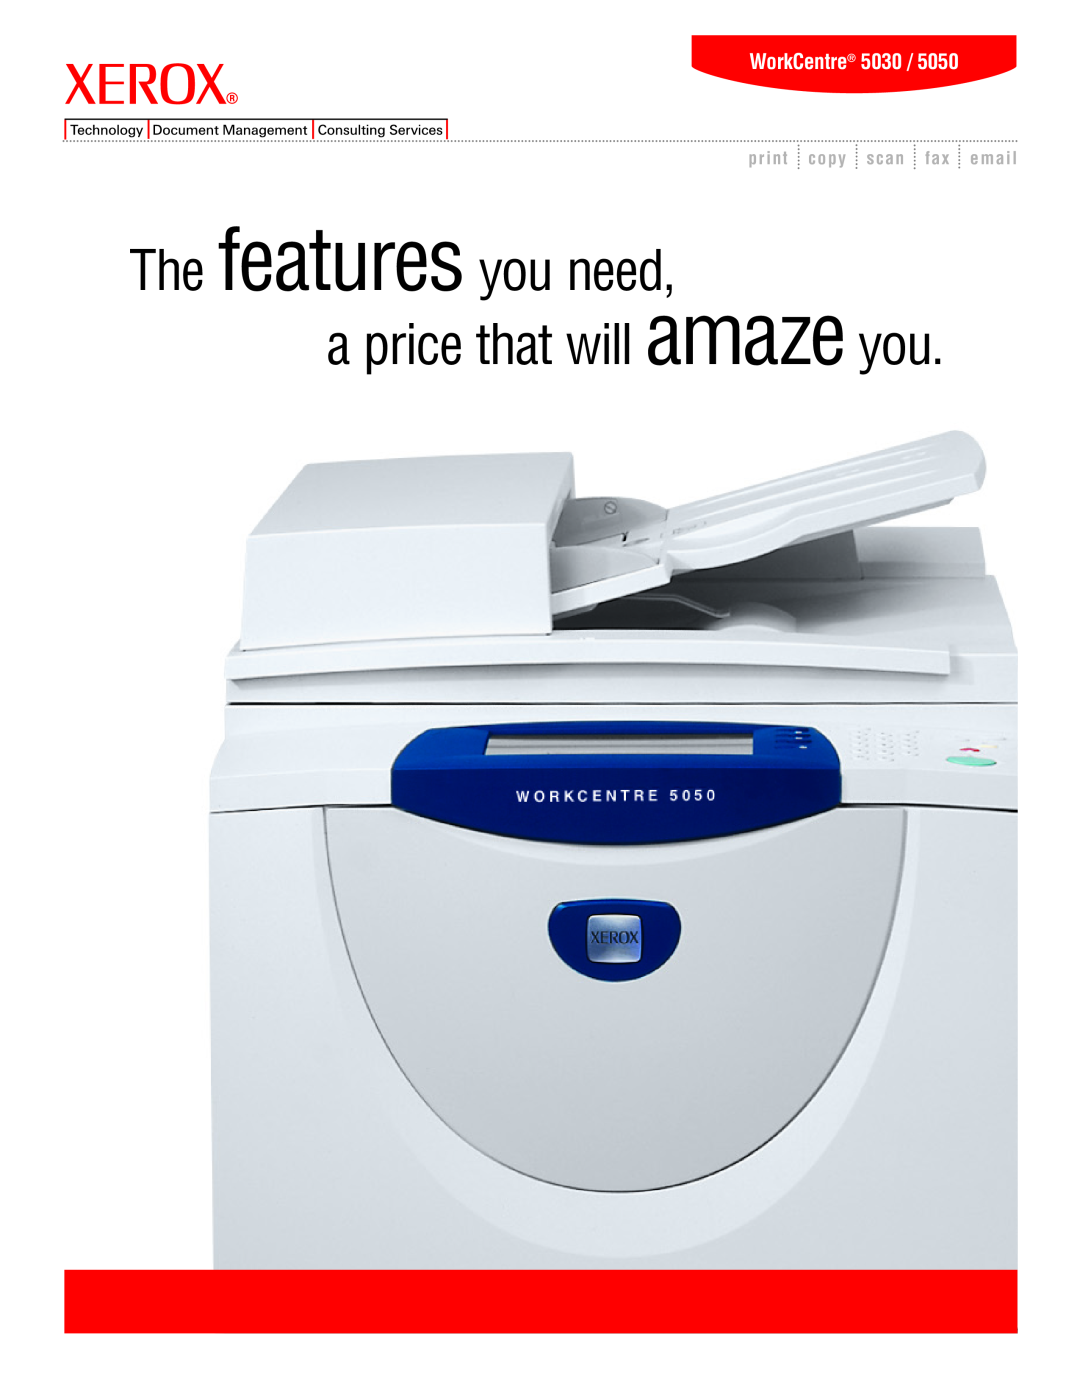 Xerox 5050, 5030 manual WorkCentre, The features you need a price that will amaze you, print copy scan fax email 